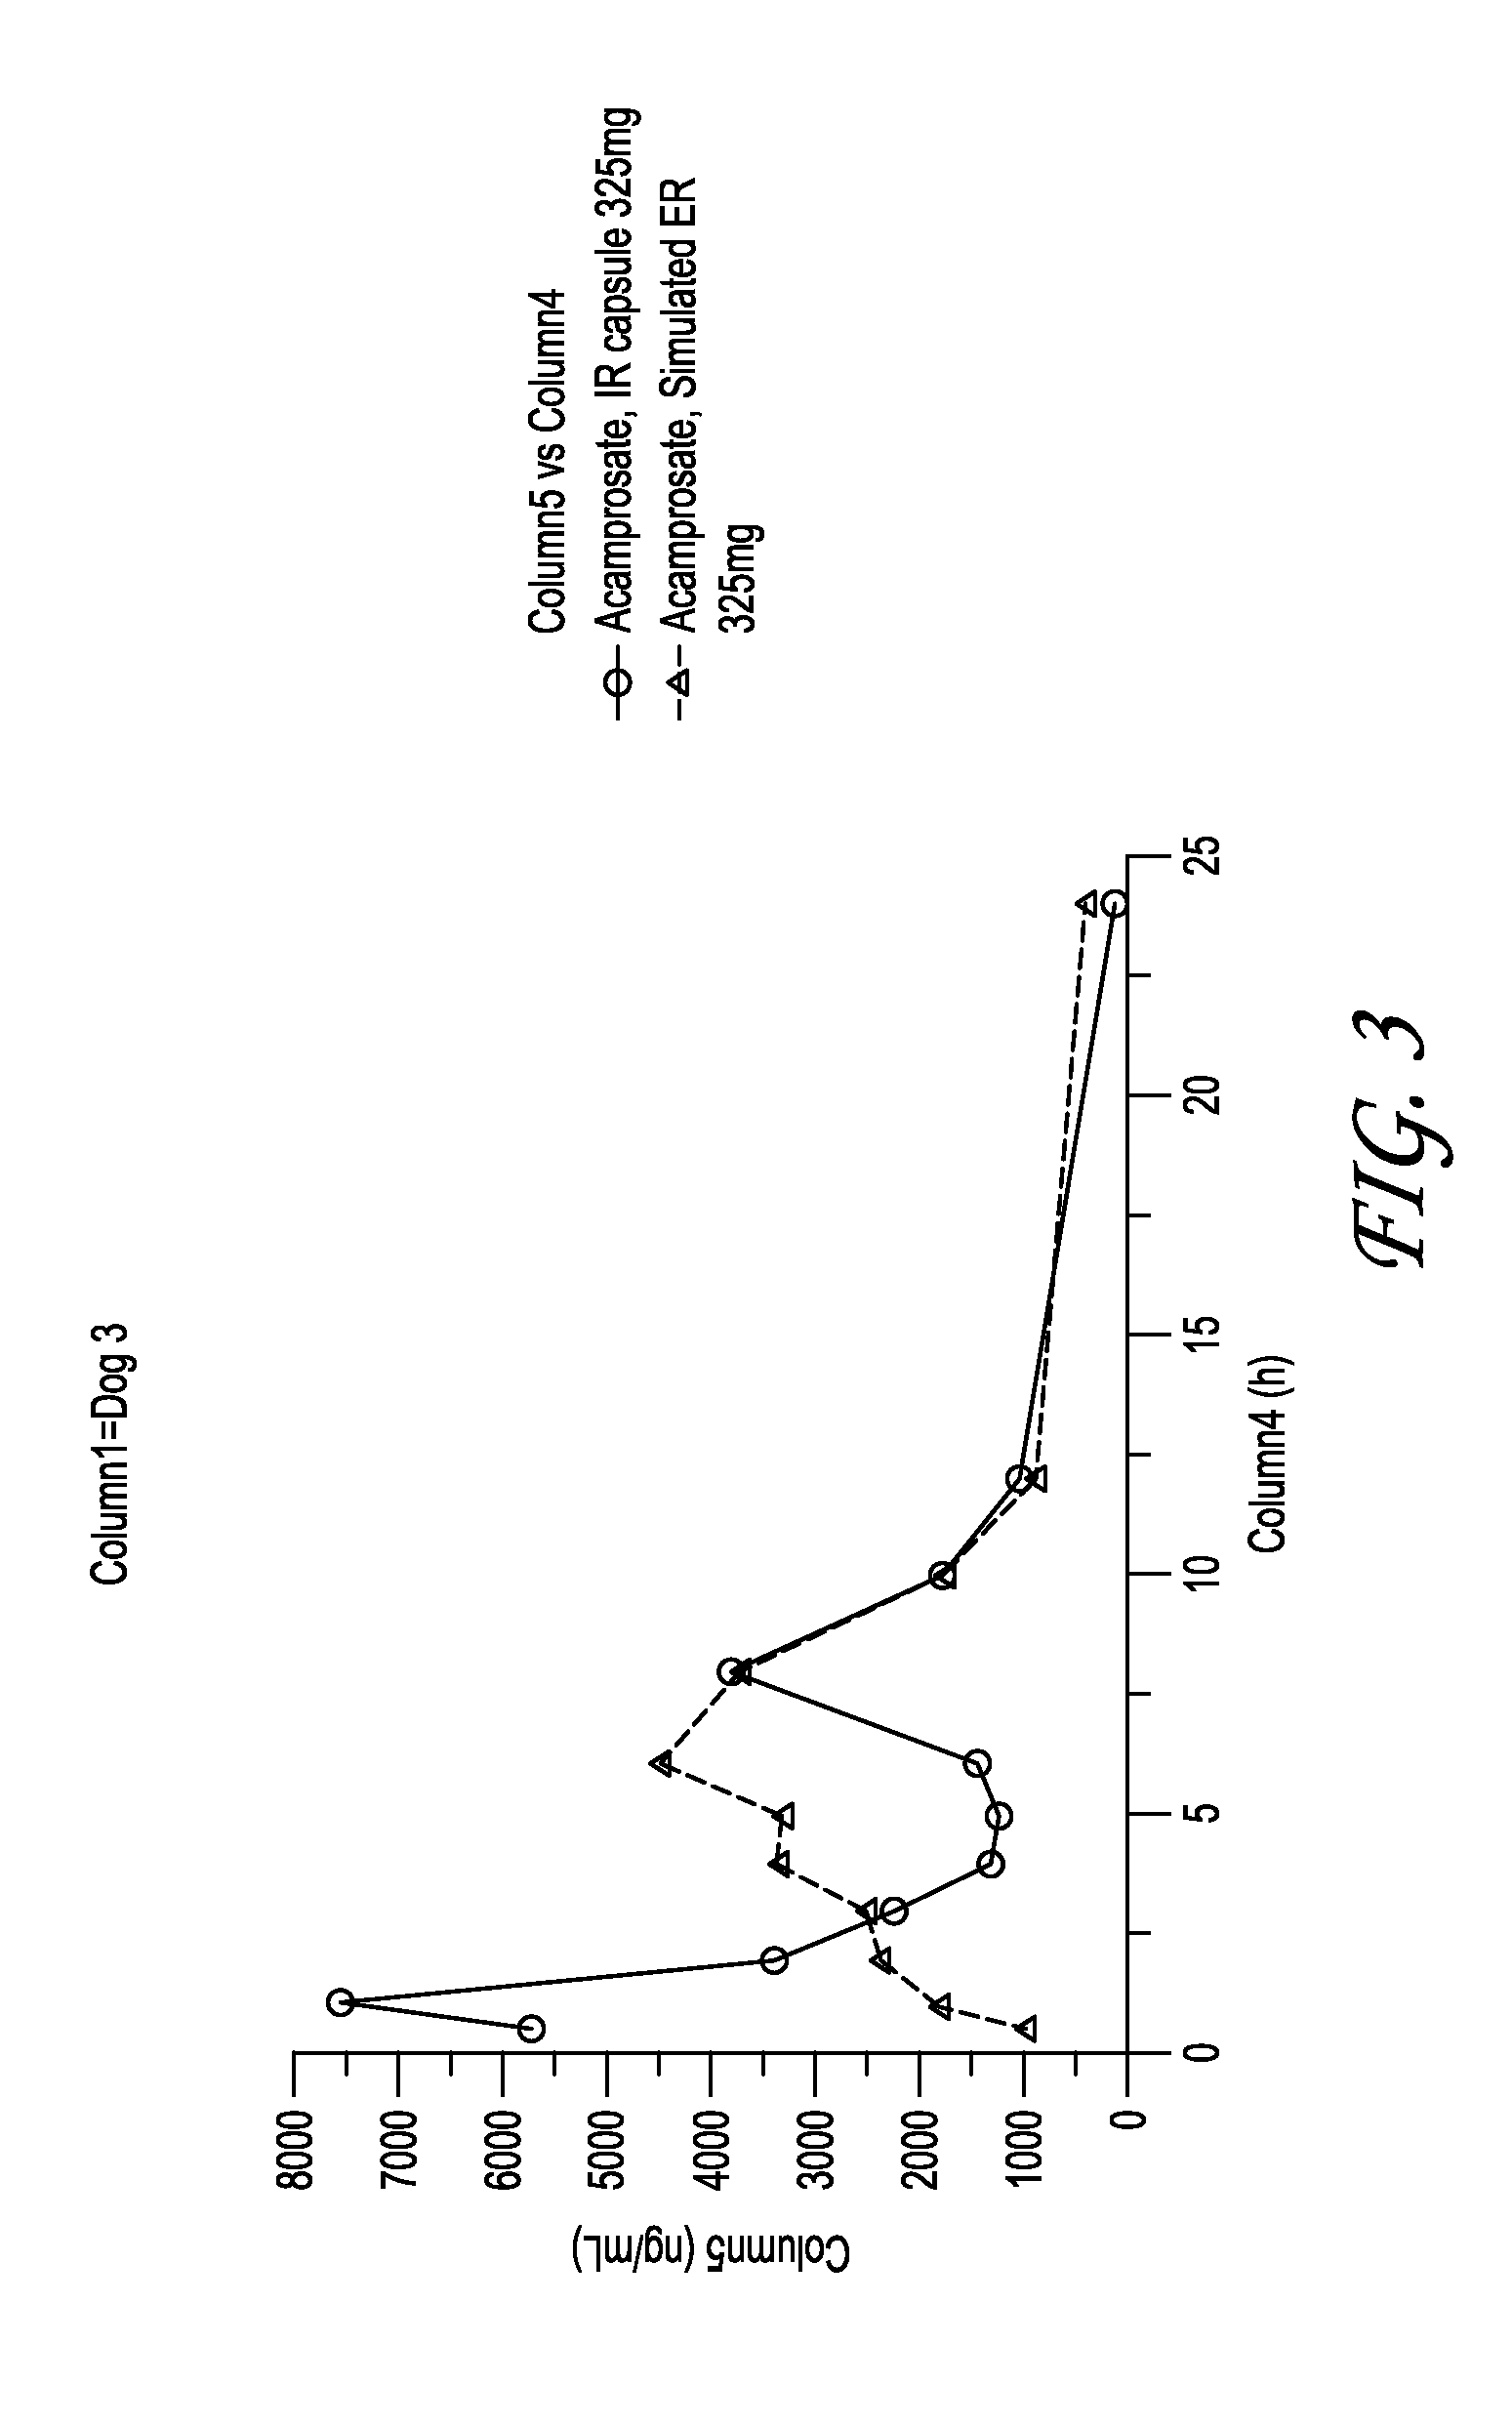 Acamprosate formulations, methods of using the same, and combinations comprising the same